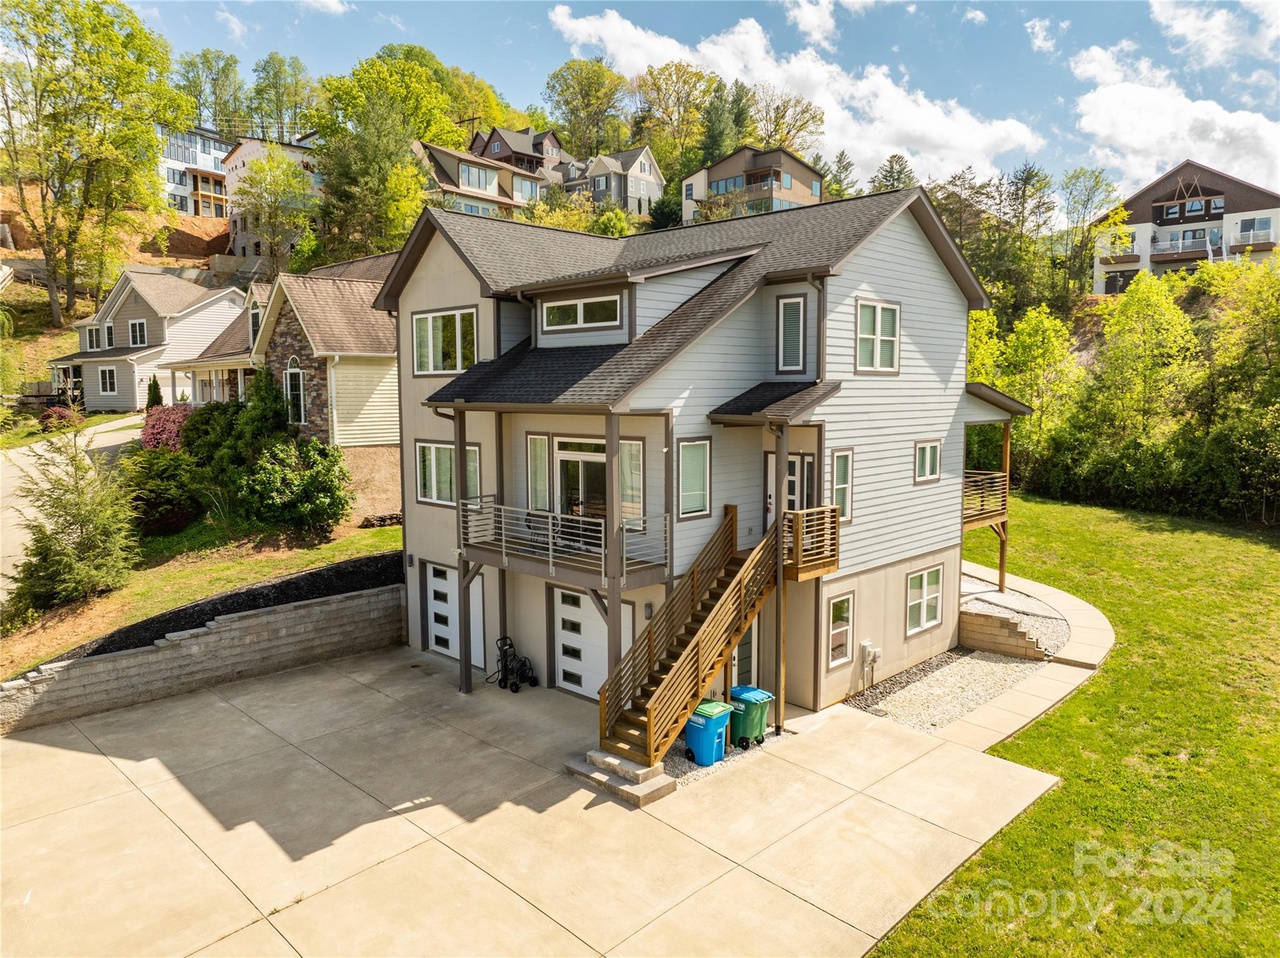 15 Moss Pink Pl, Asheville, NC 28806 | MLS# 4127177 | Redfin